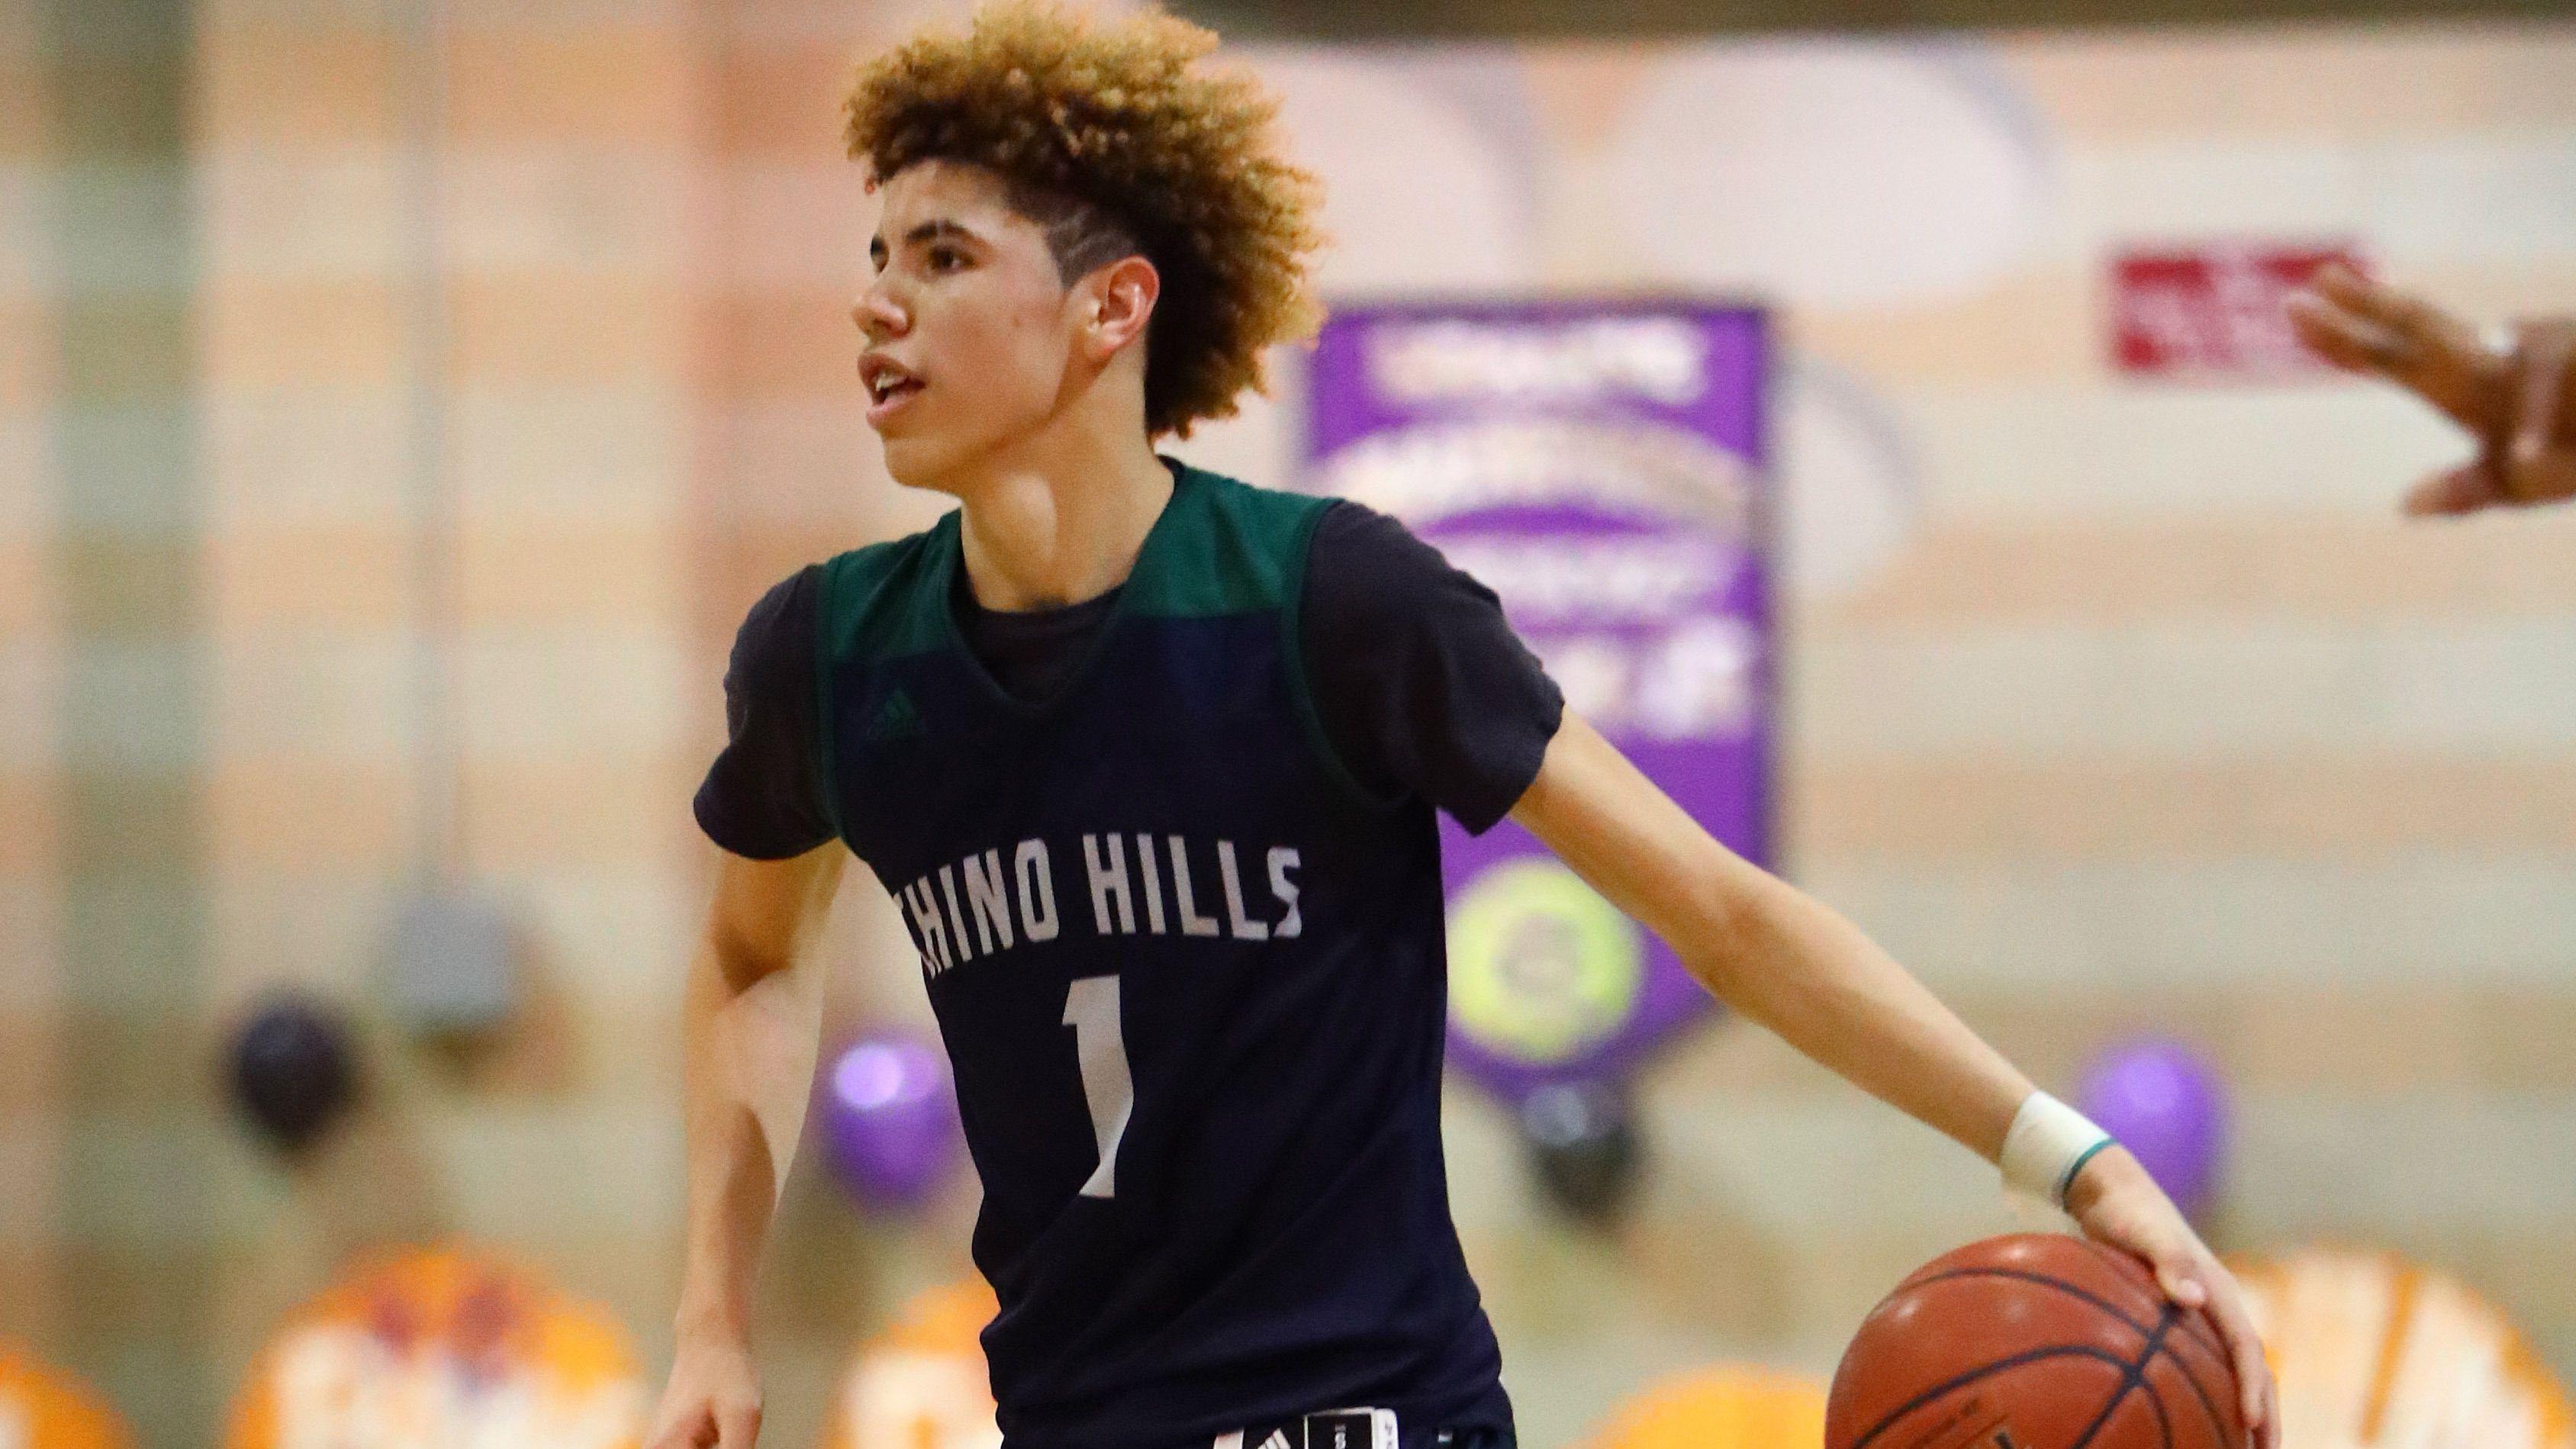 182.9k Likes, 3,729 Comments - LaMelo Ball (@swaggymelo1) on